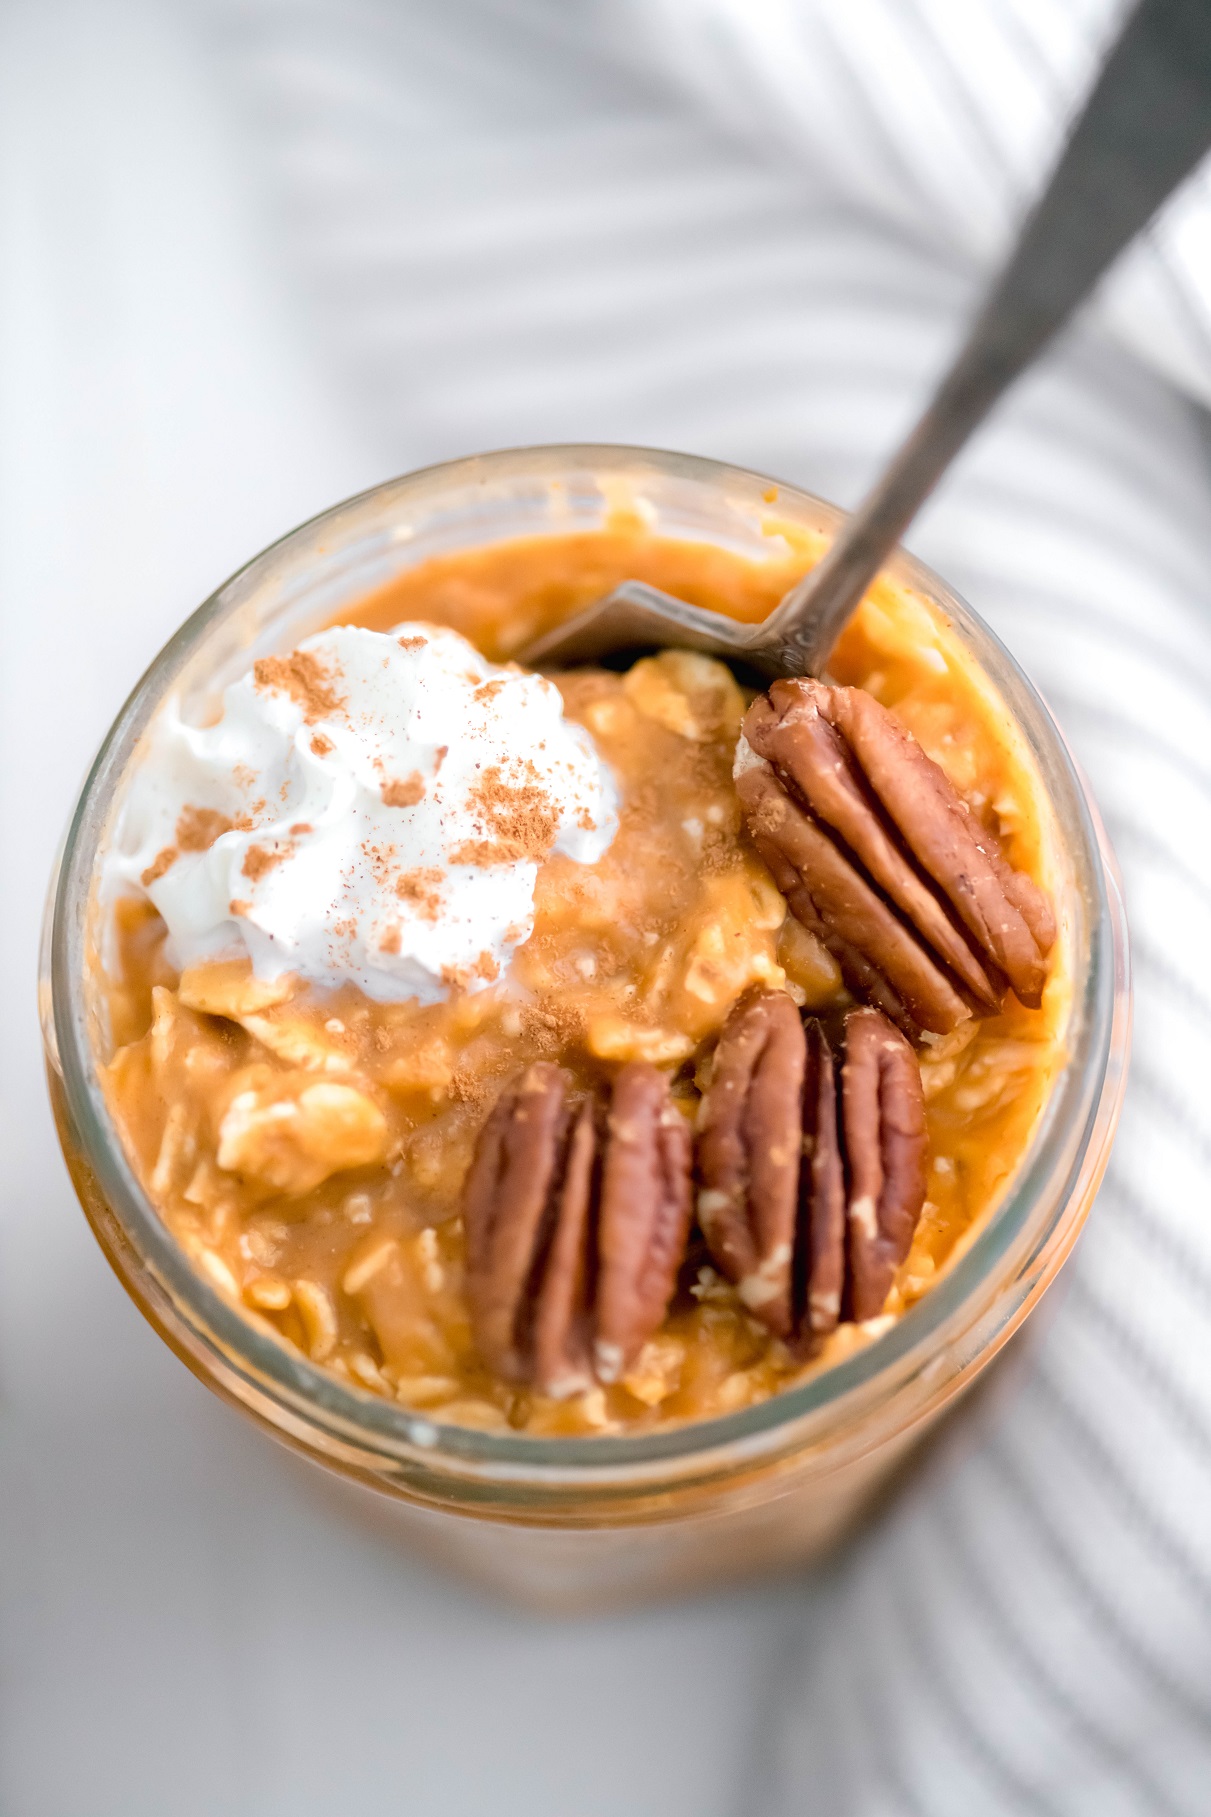 Straight down photo of a jar of pumpkin overnight oats garnished with three pecan halves, a dollop of whipped cream and a sprinkle of cinnamon. Jar has a spoon in it with a cloth napkin draped on the right side of the jar.